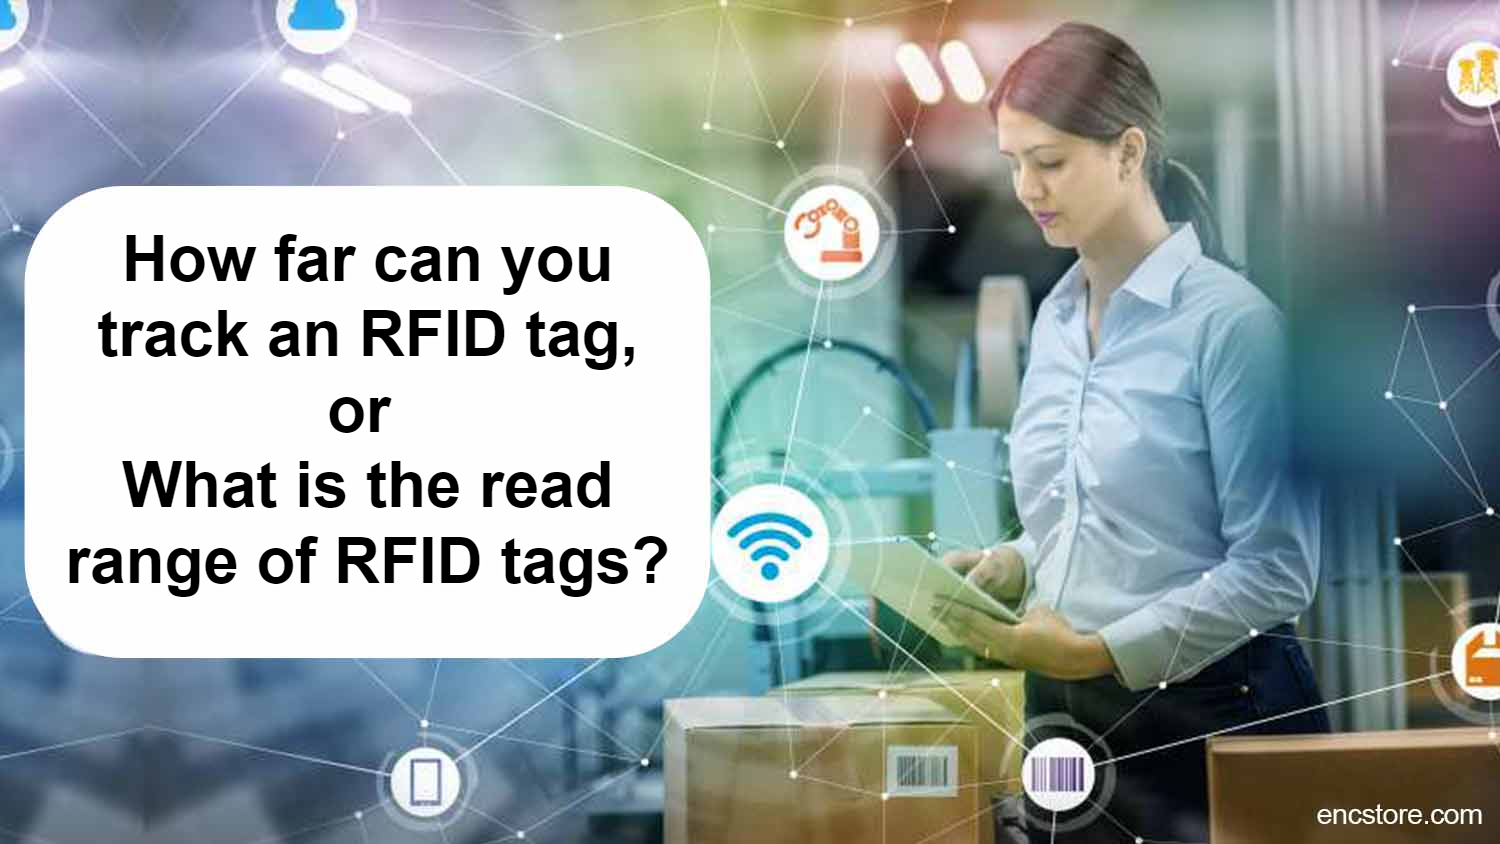 How far can you track an RFID tag, what is the read range of RFID tags